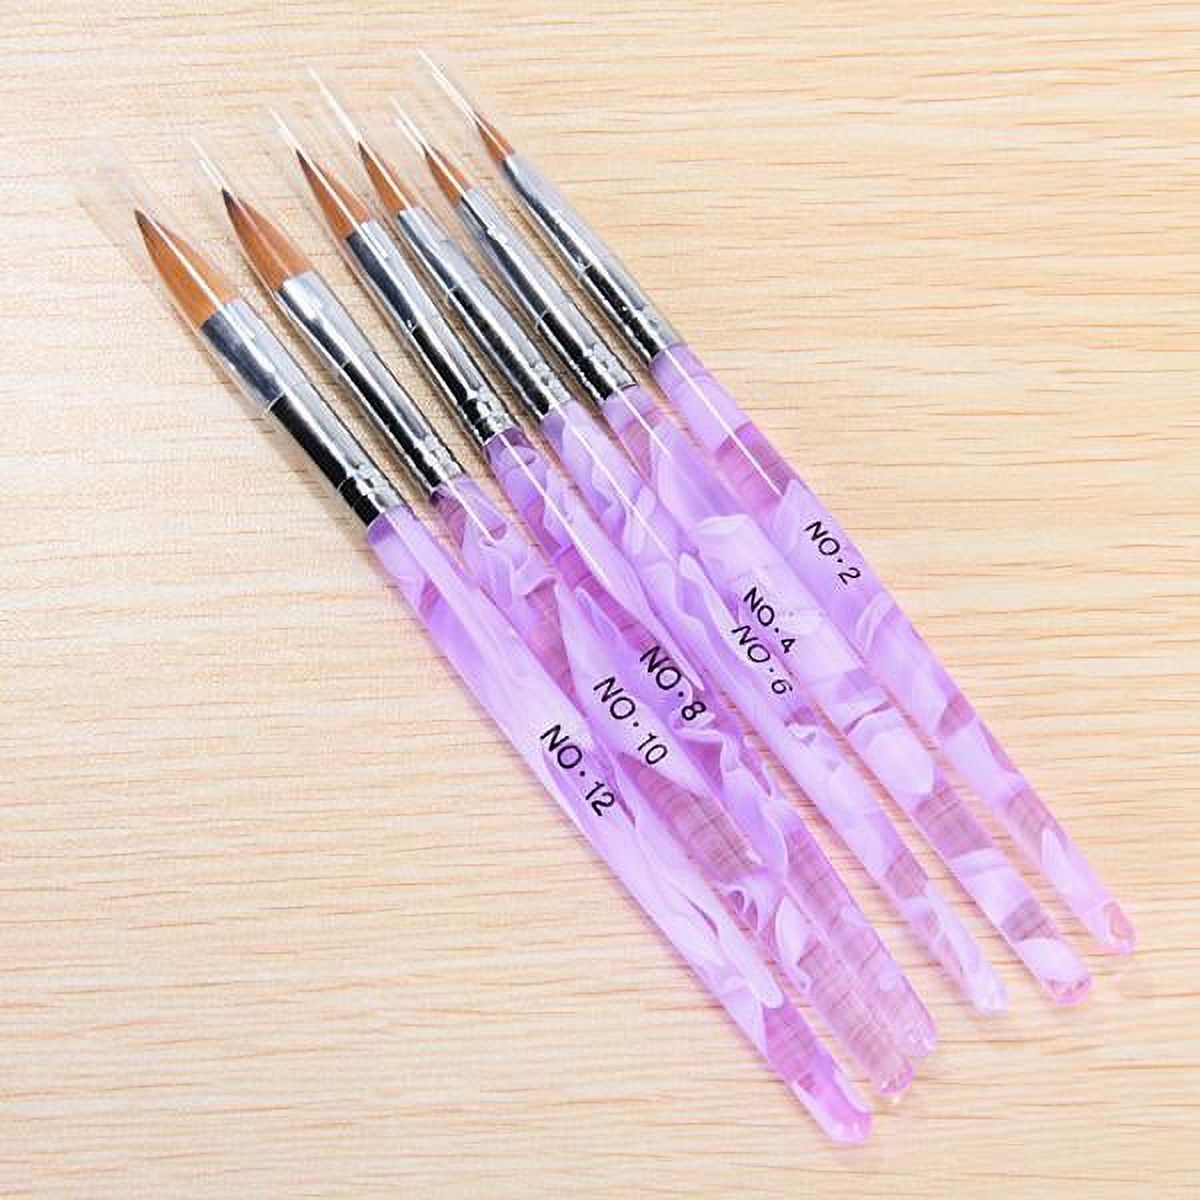 Set Of S Assorted Sizes Acrylic Nail Art Brush Manicure Equipment Beauty Supplies Cosmetic Tool Light Lavender - image 1 of 7